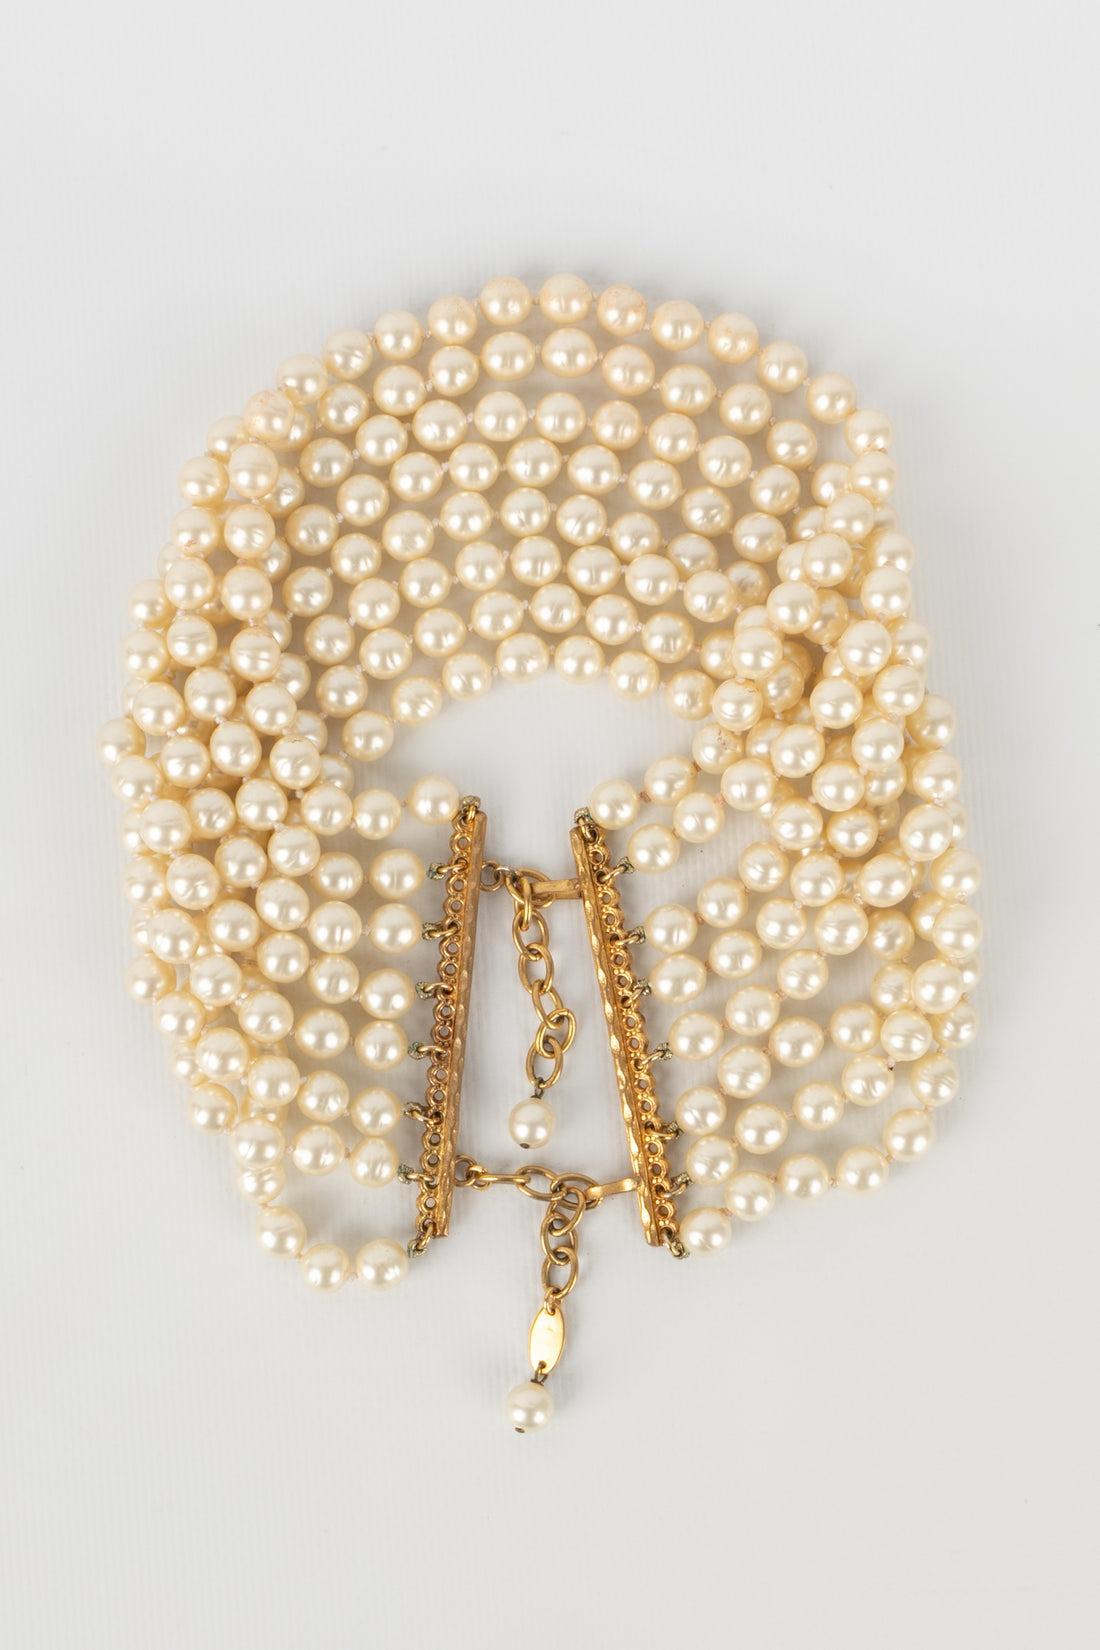 Women's Chanel Golden Metal Choker Necklace with Costumer Pearls, 1980s